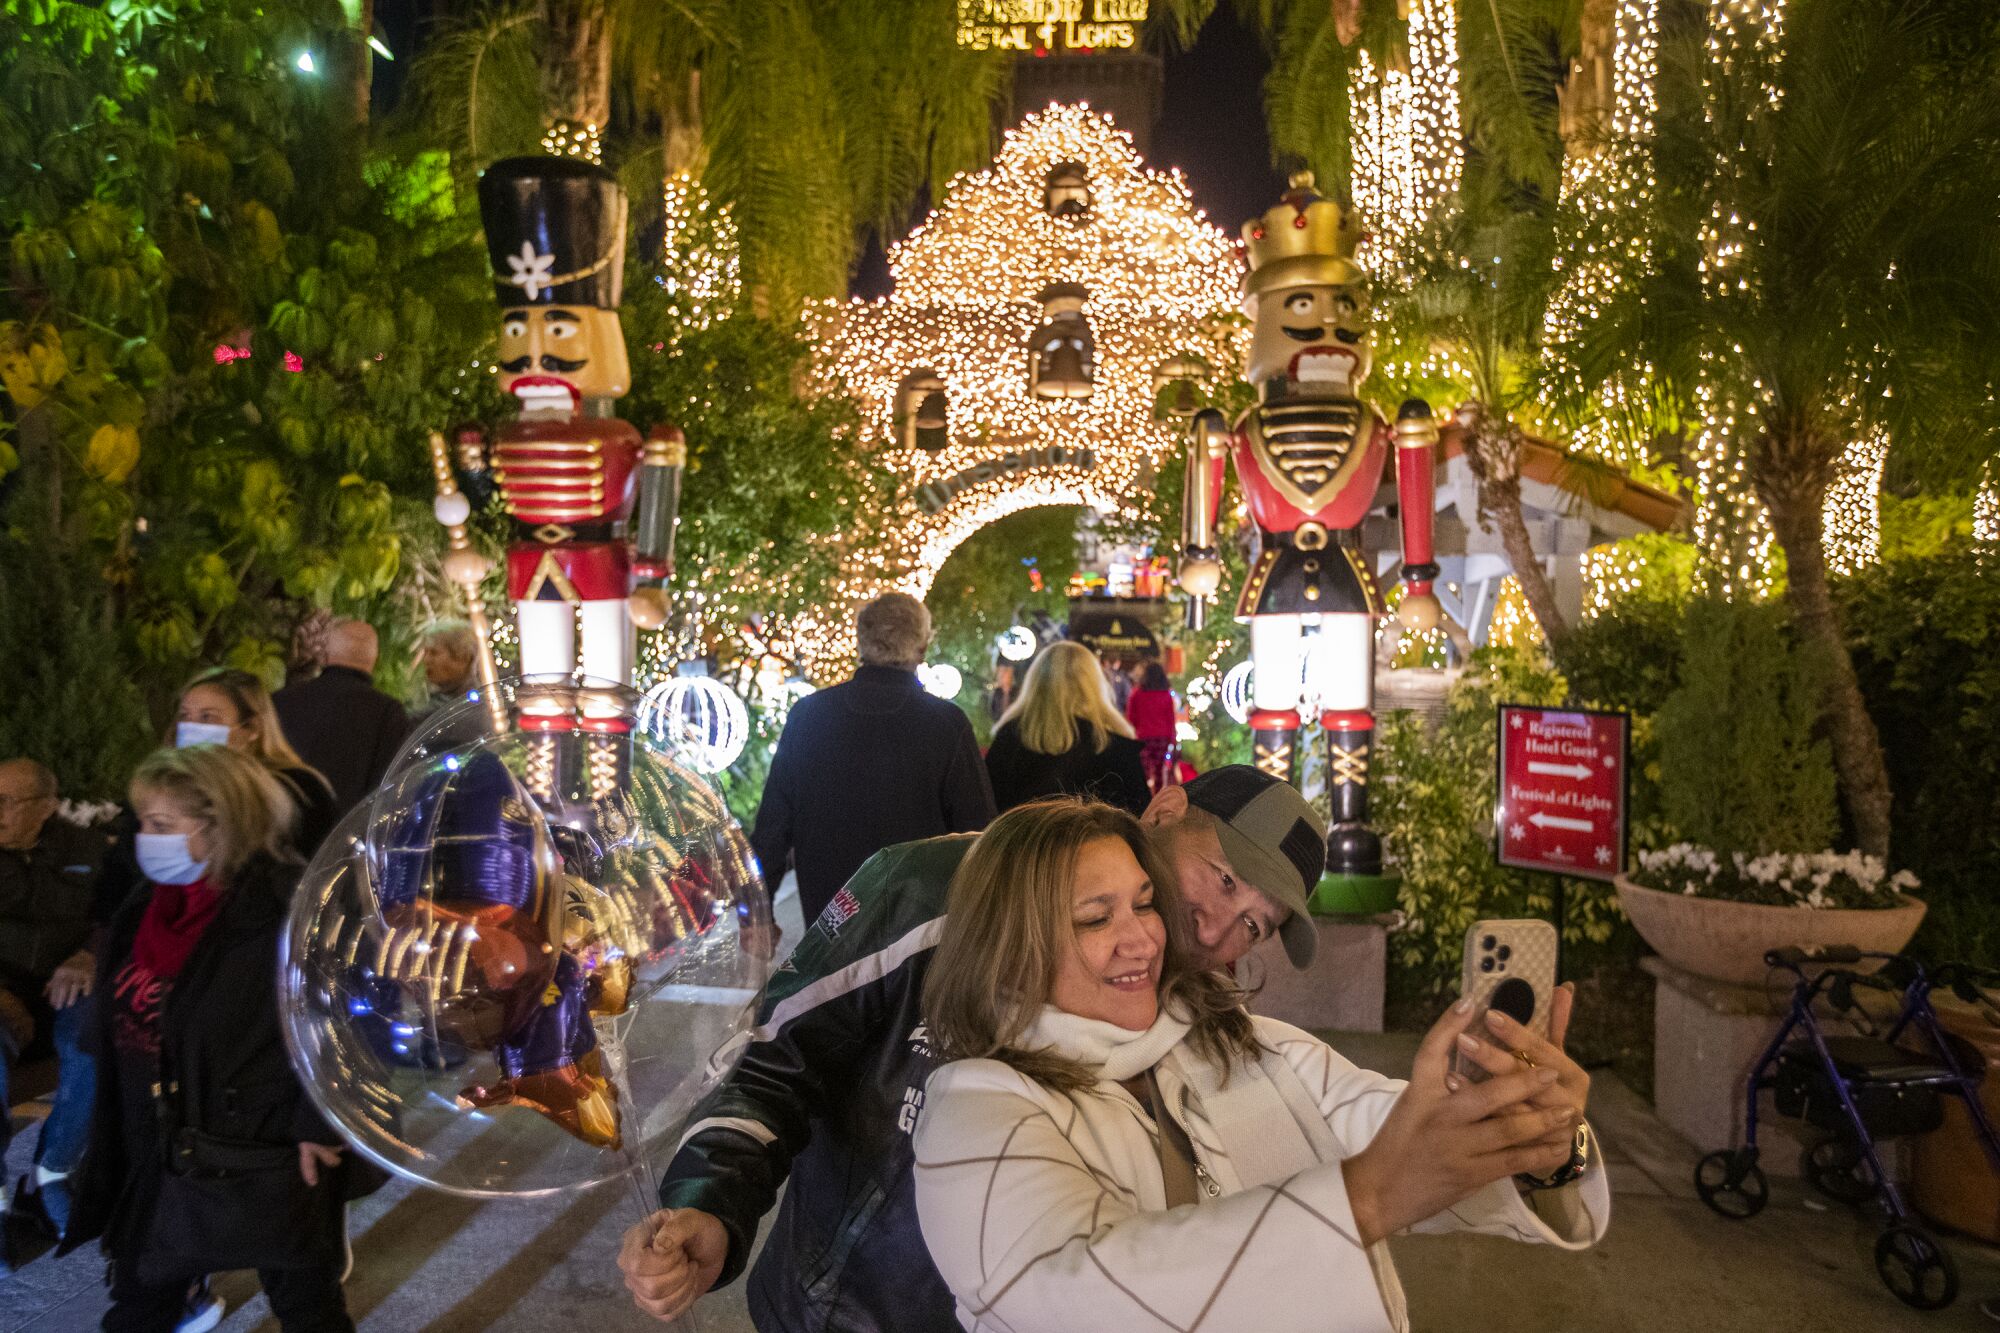 A couple take photos at the Mission Inn Hotel & Spa decorated with lights and big toy nutcracker soldier displays.